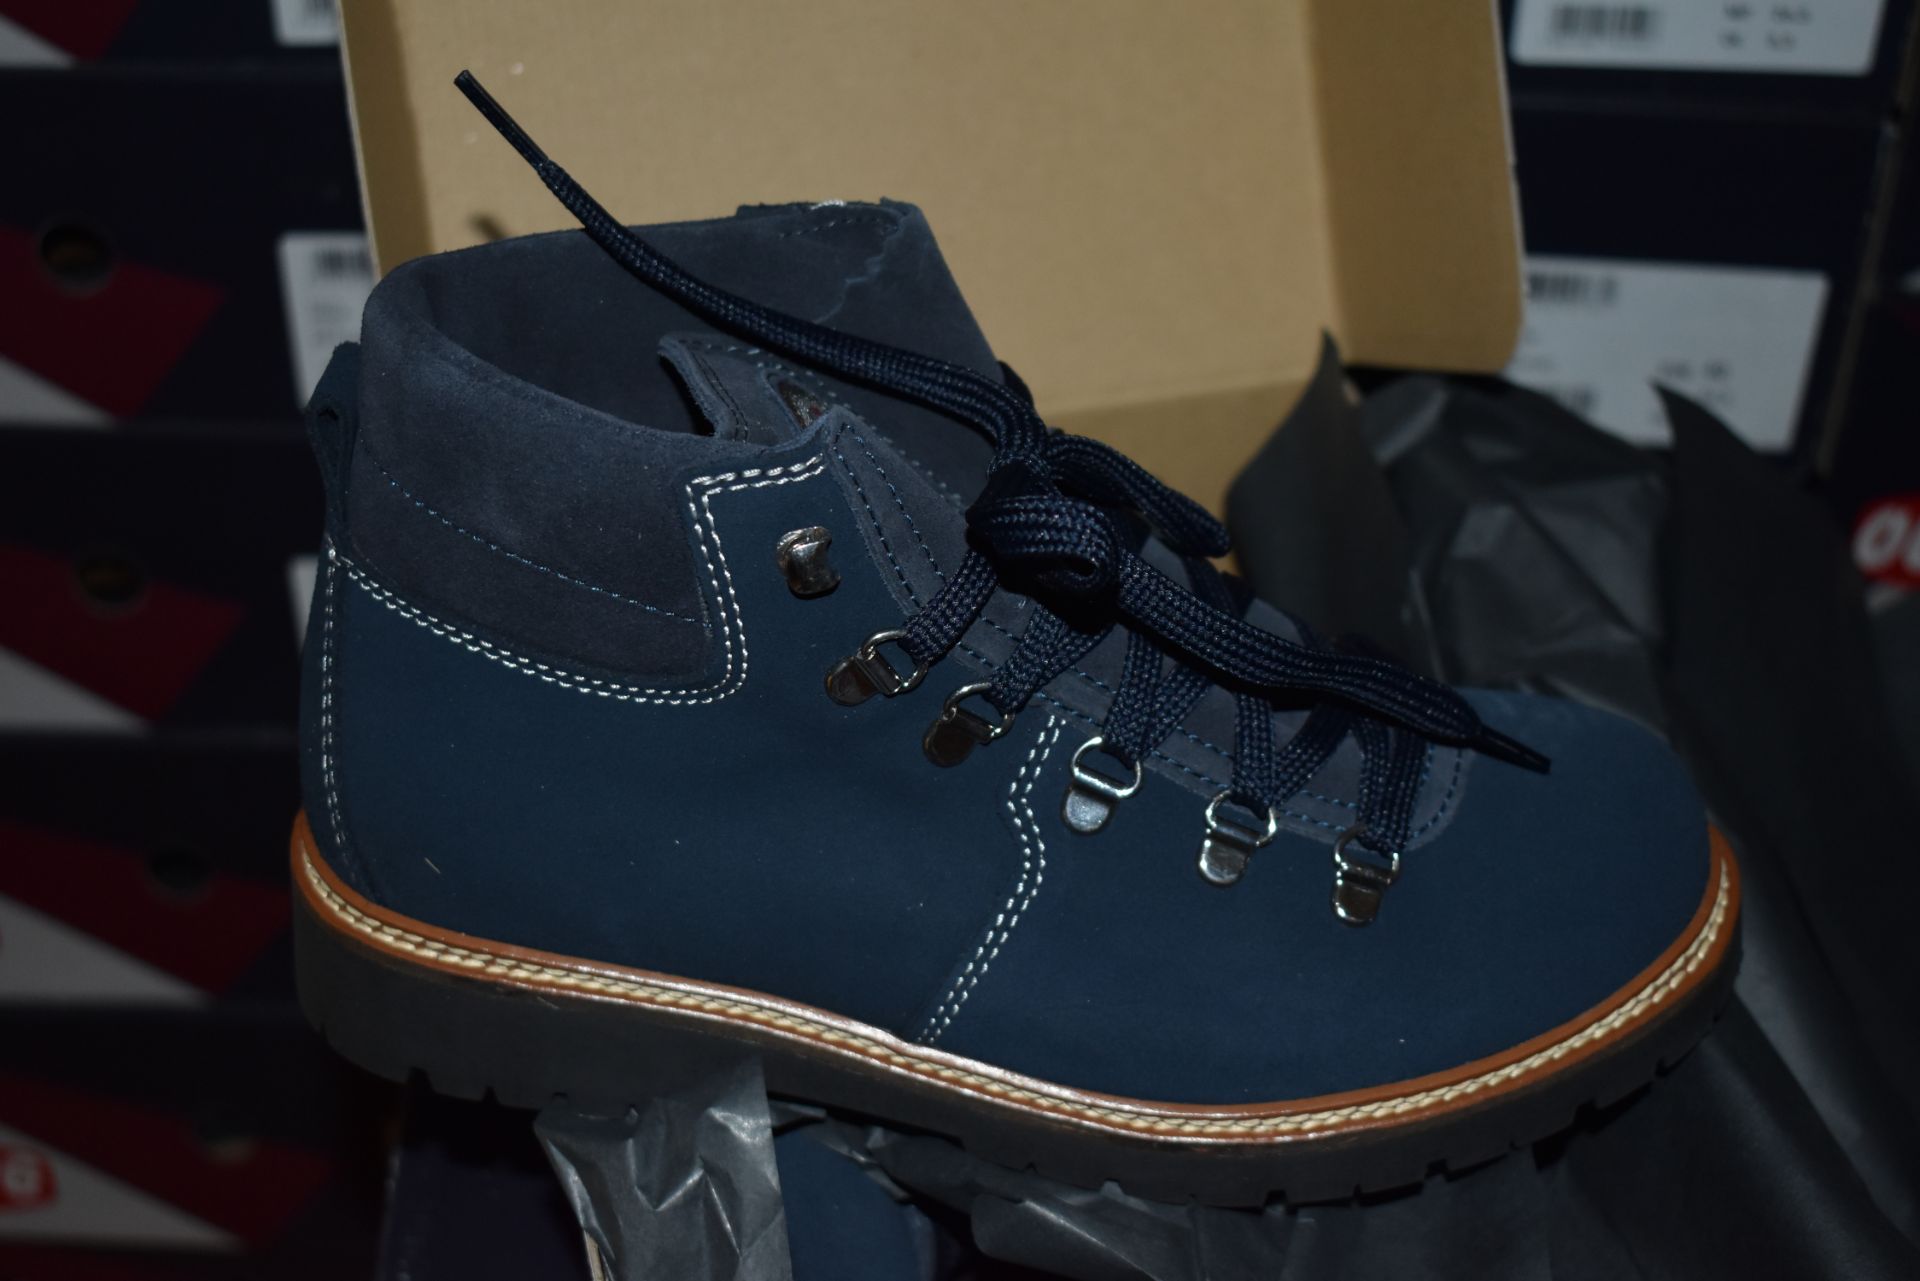 1 x Pair of Designer Olang Merano 82 Blu Women's Winter Boots - Euro Size 38 - Brand New Boxed Stock - Image 2 of 4